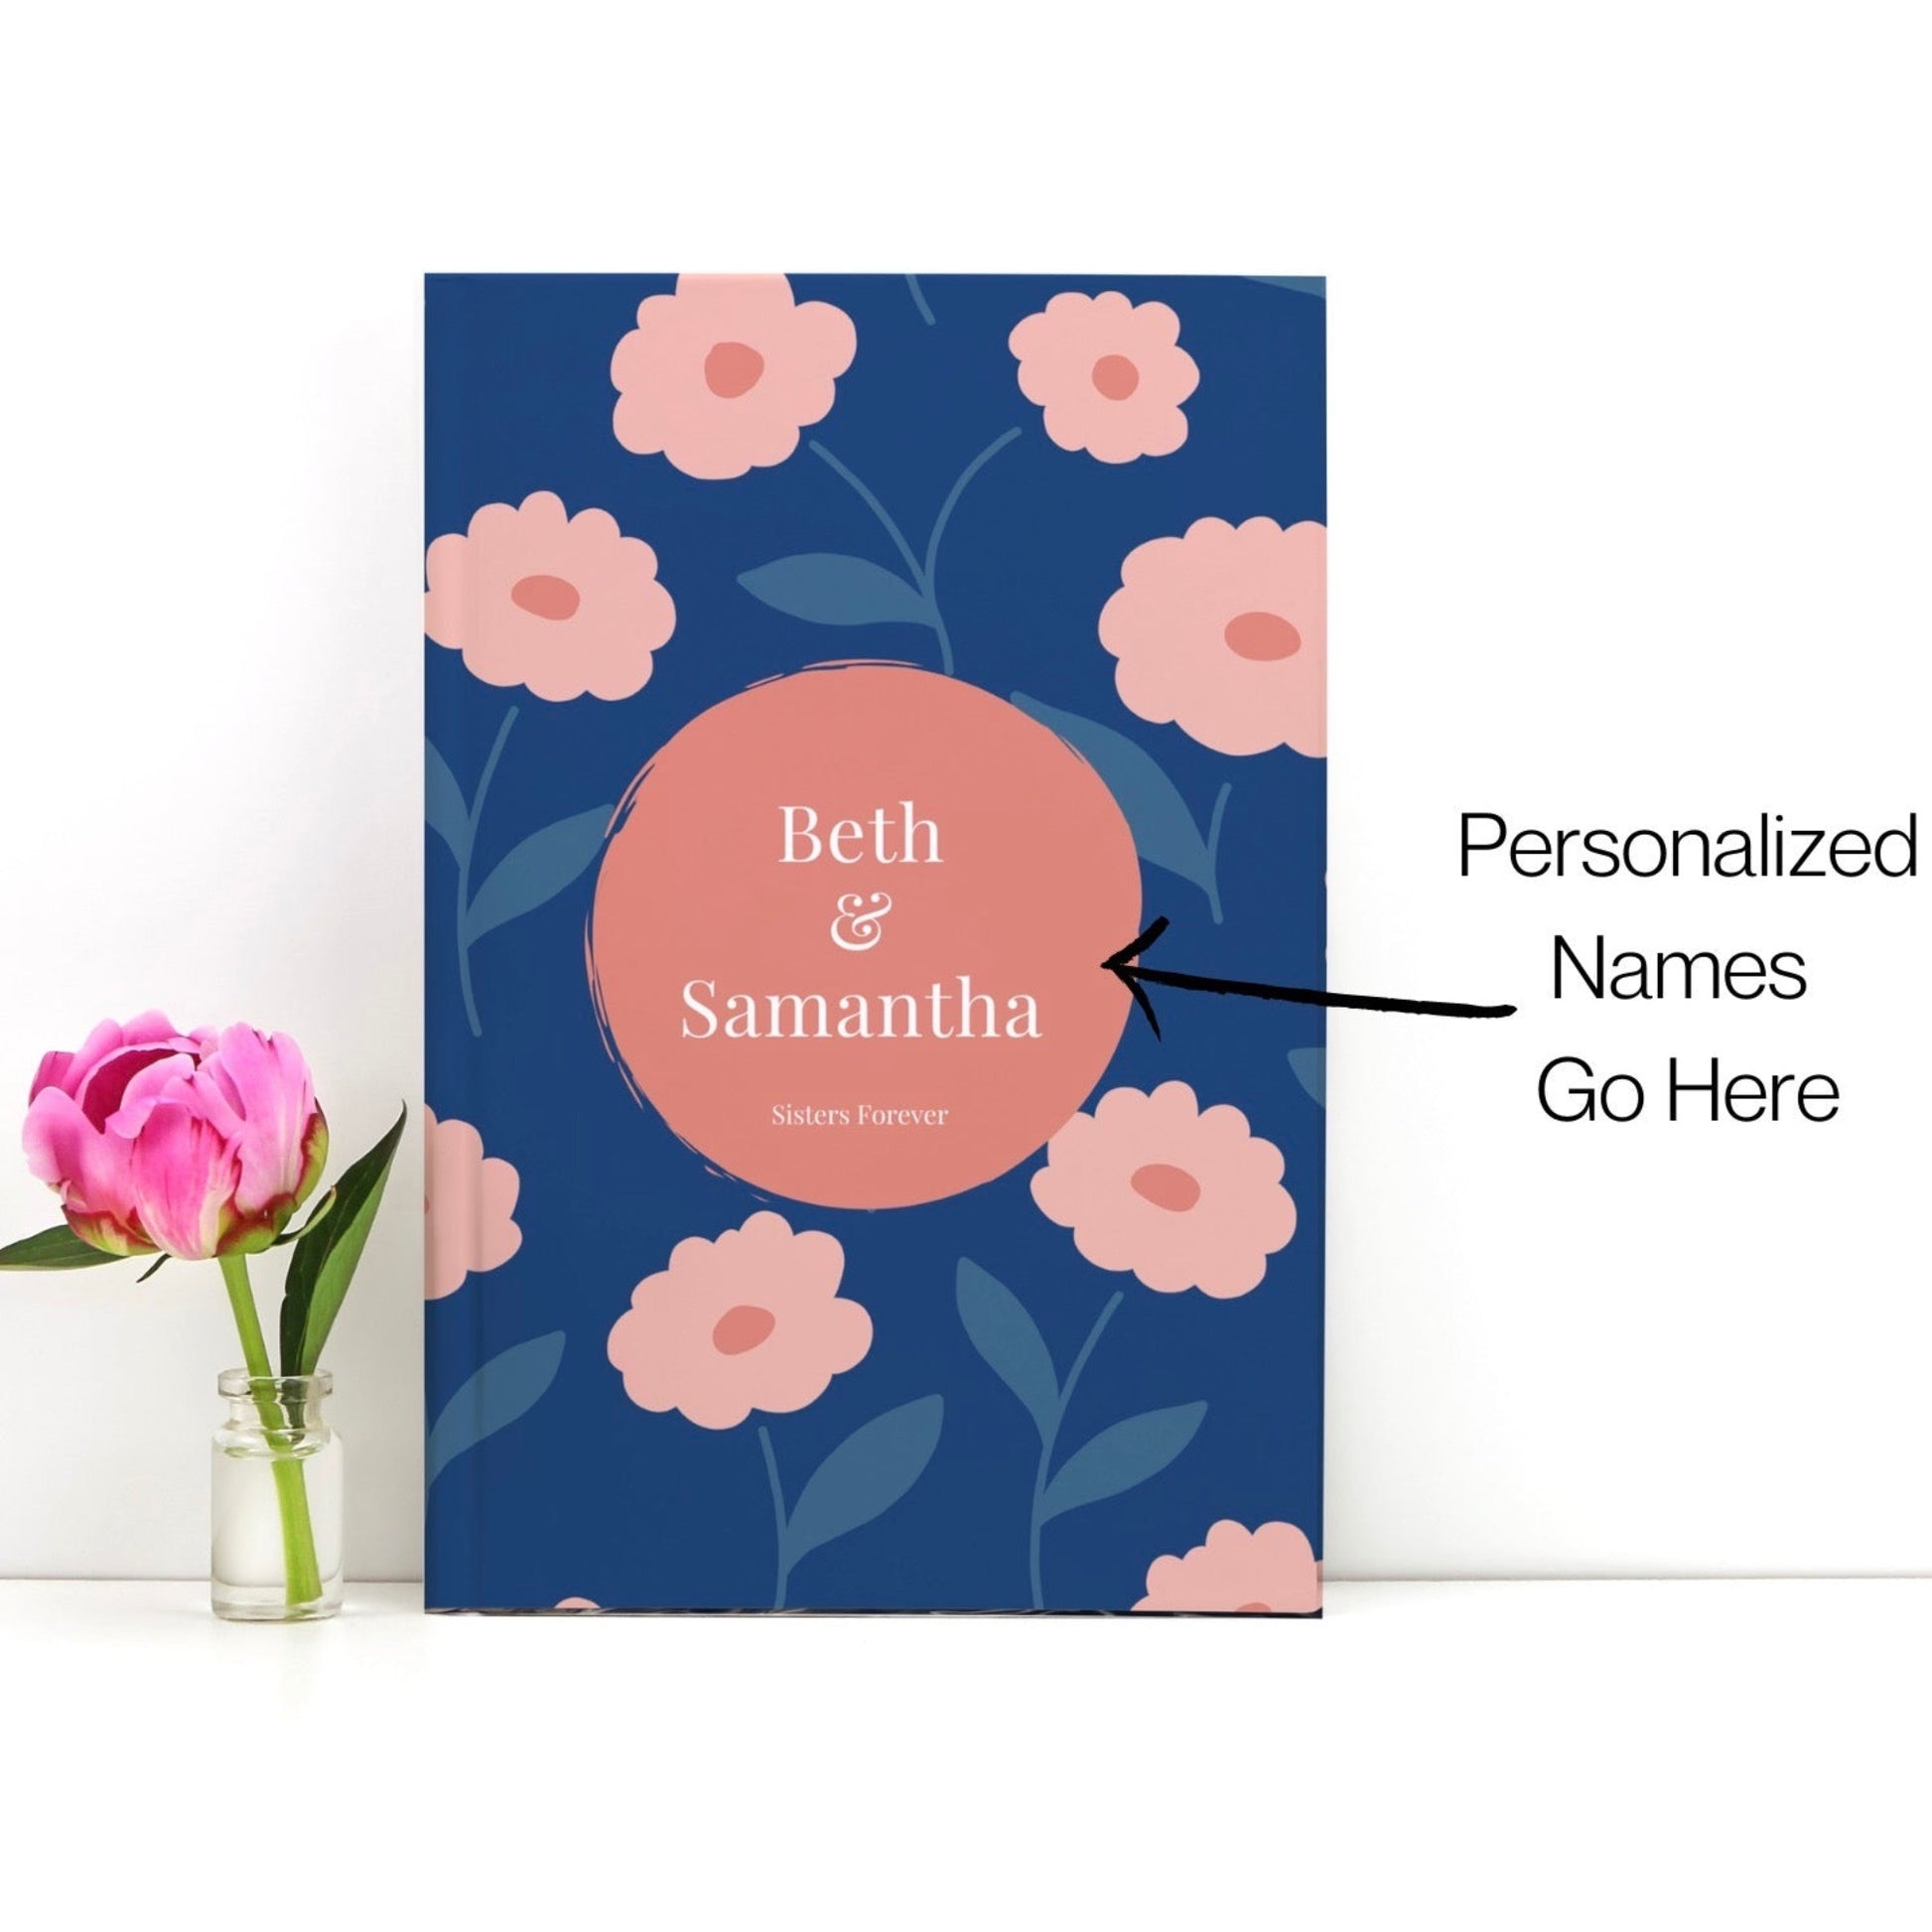 Personalized book shows two sisters names. gift for sister. Luhvee Books.